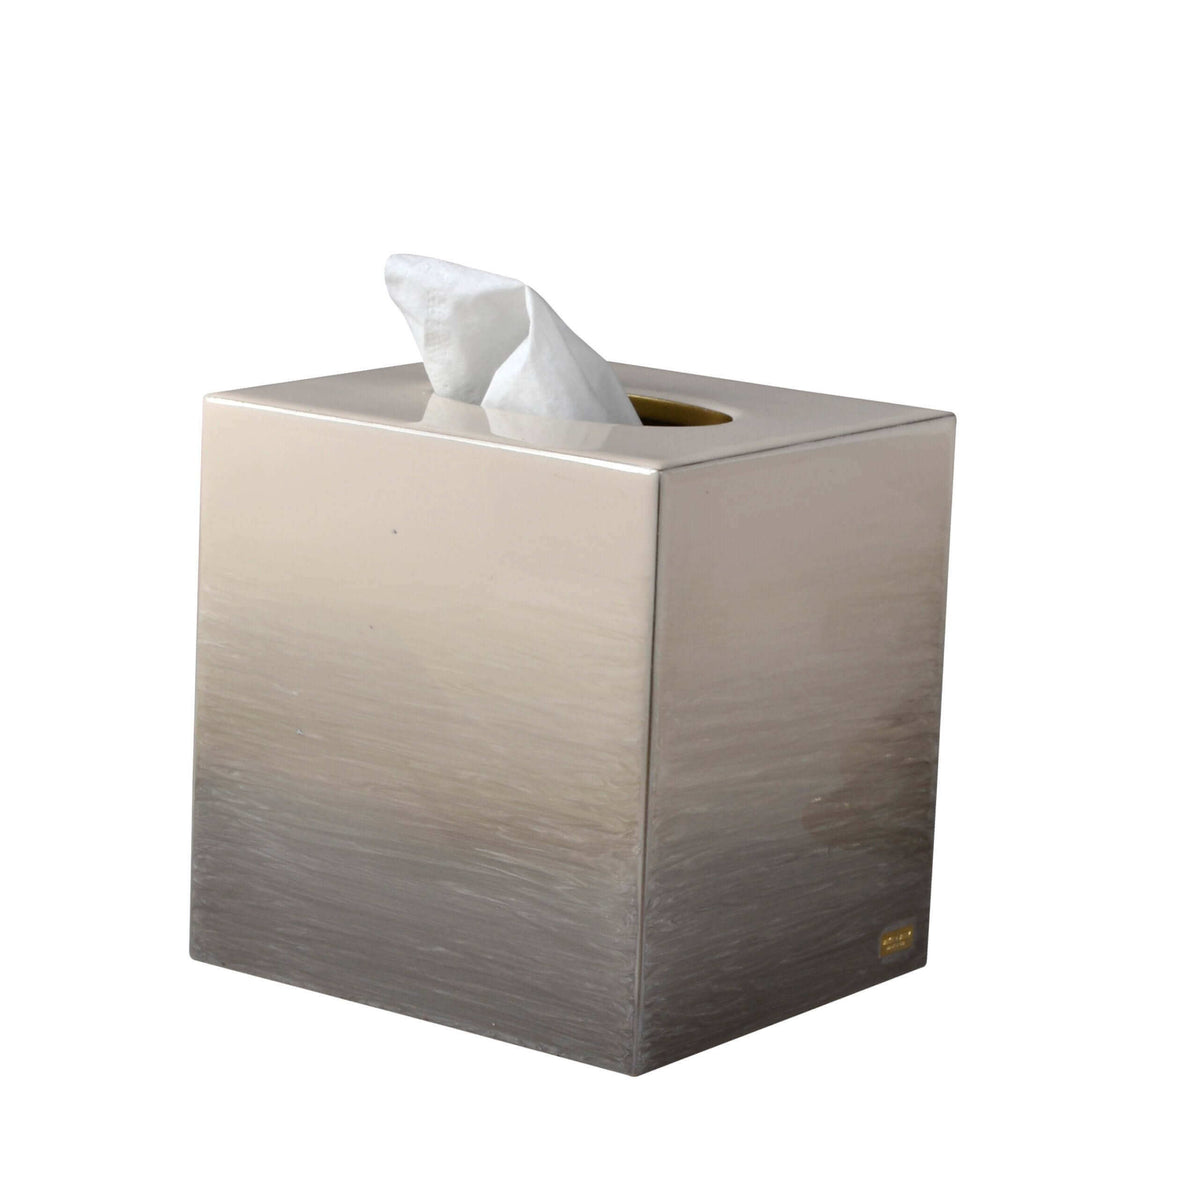 Mike + Ally - Ombre Tissue boutique - 58059N - beige  - 